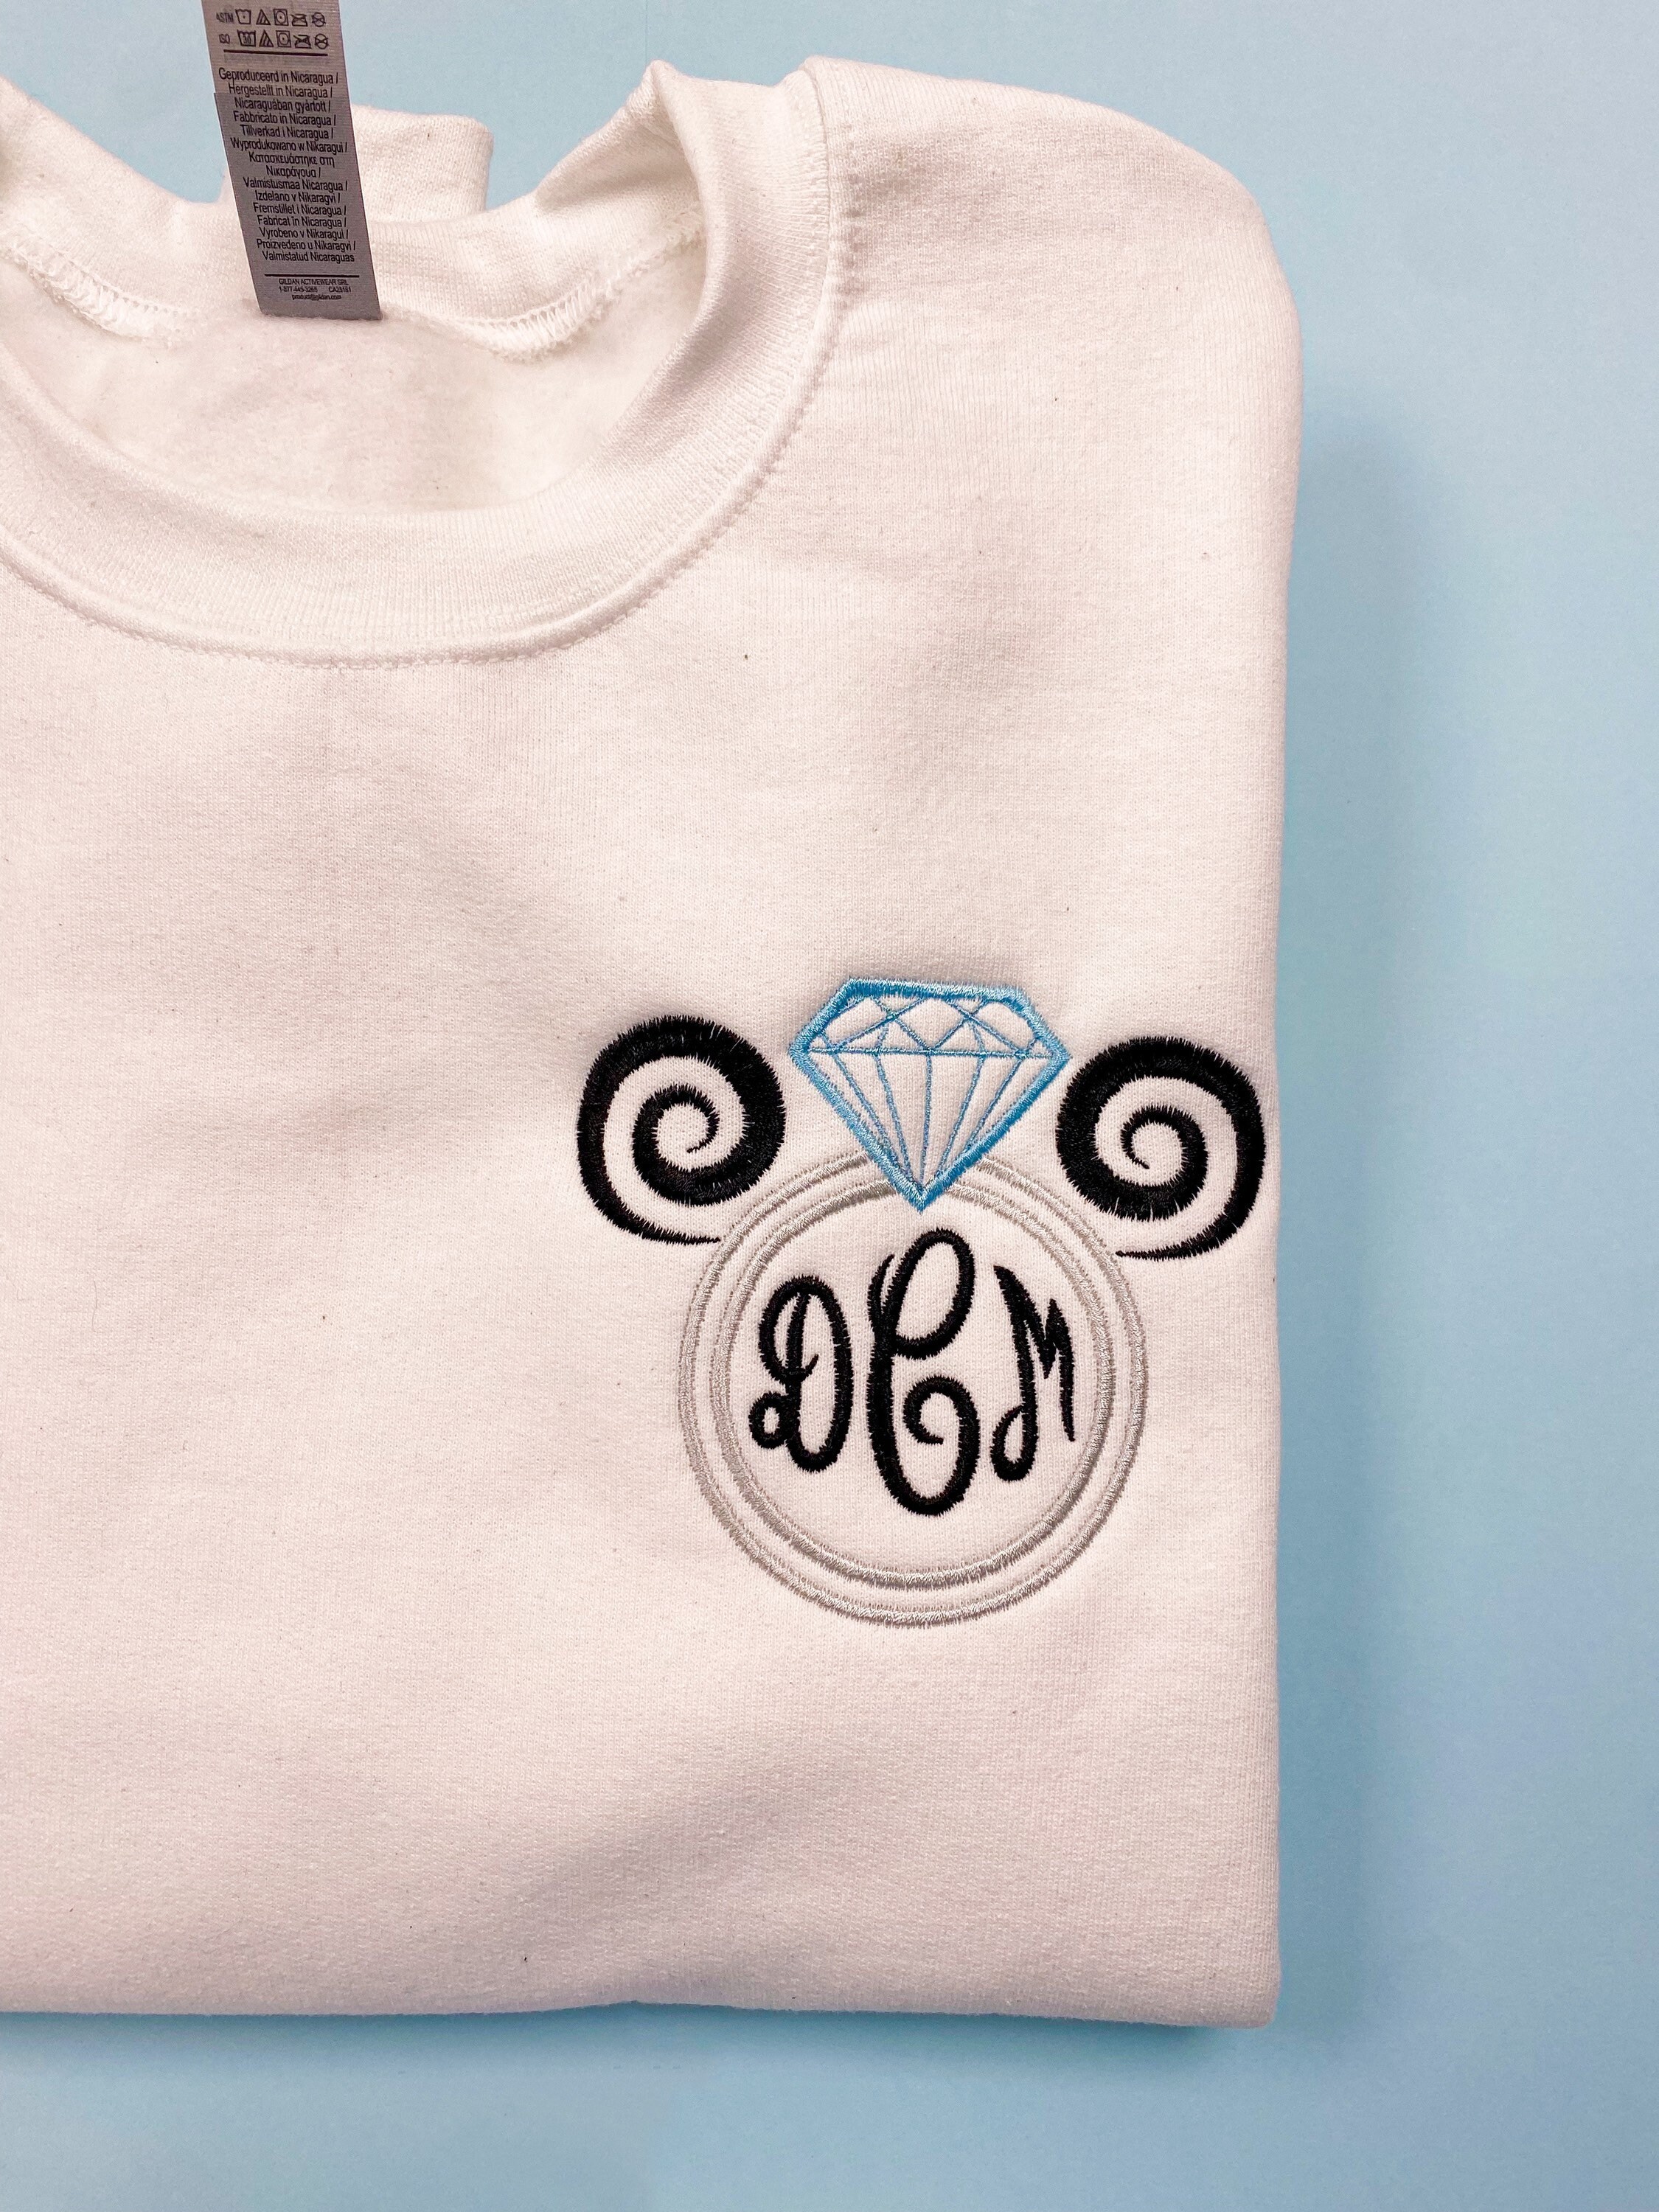 Simple Monogram Sweatshirt, Dainty Embroidery, Great for Bridal Parties! –  The Southern Post